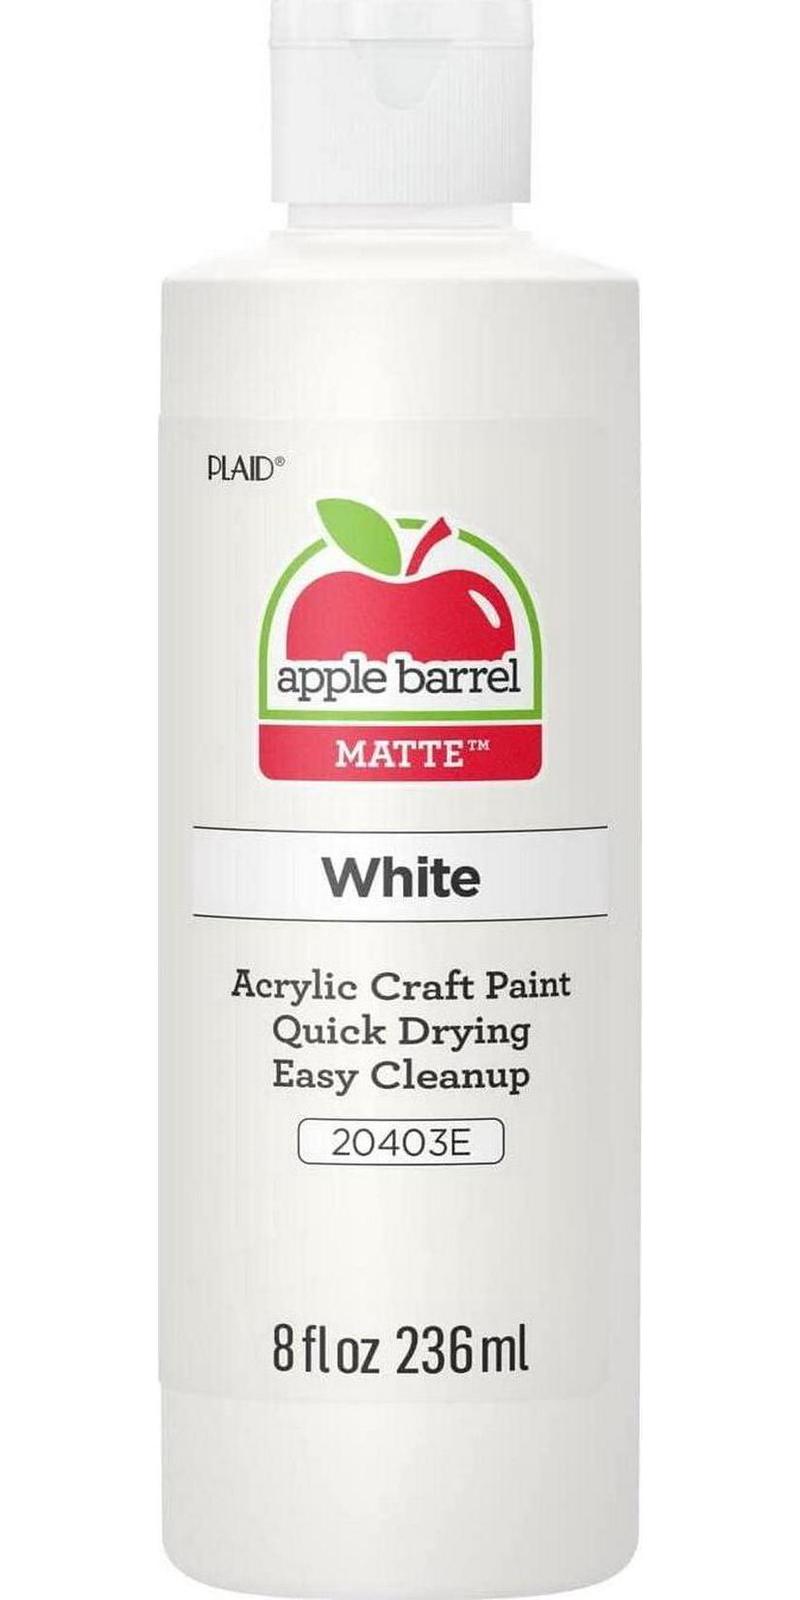 Apple Barrel Gloss Acrylic Paint in Assorted Colors (2-Ounce